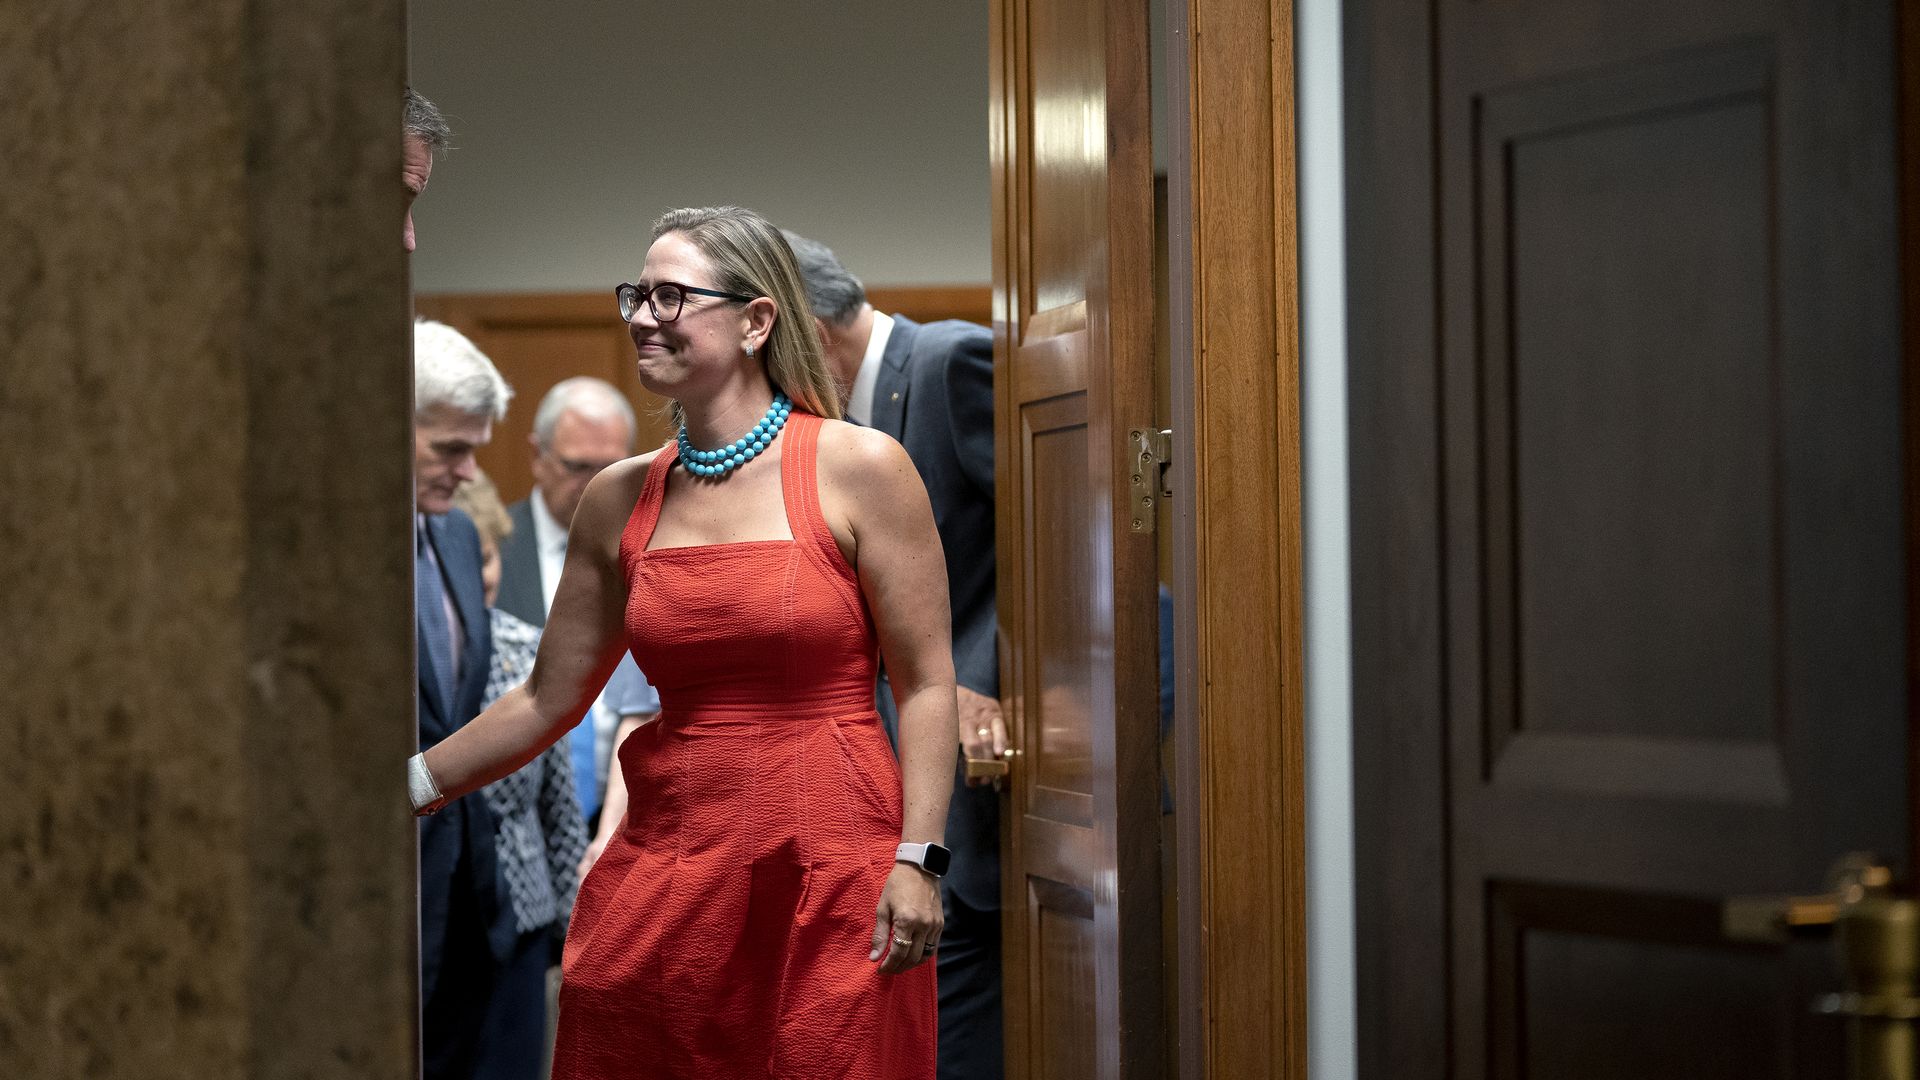 Sen. Kyrsten Sinema is seen shaking hands as she leaves a meeting of the bipartisan infrastructure group.